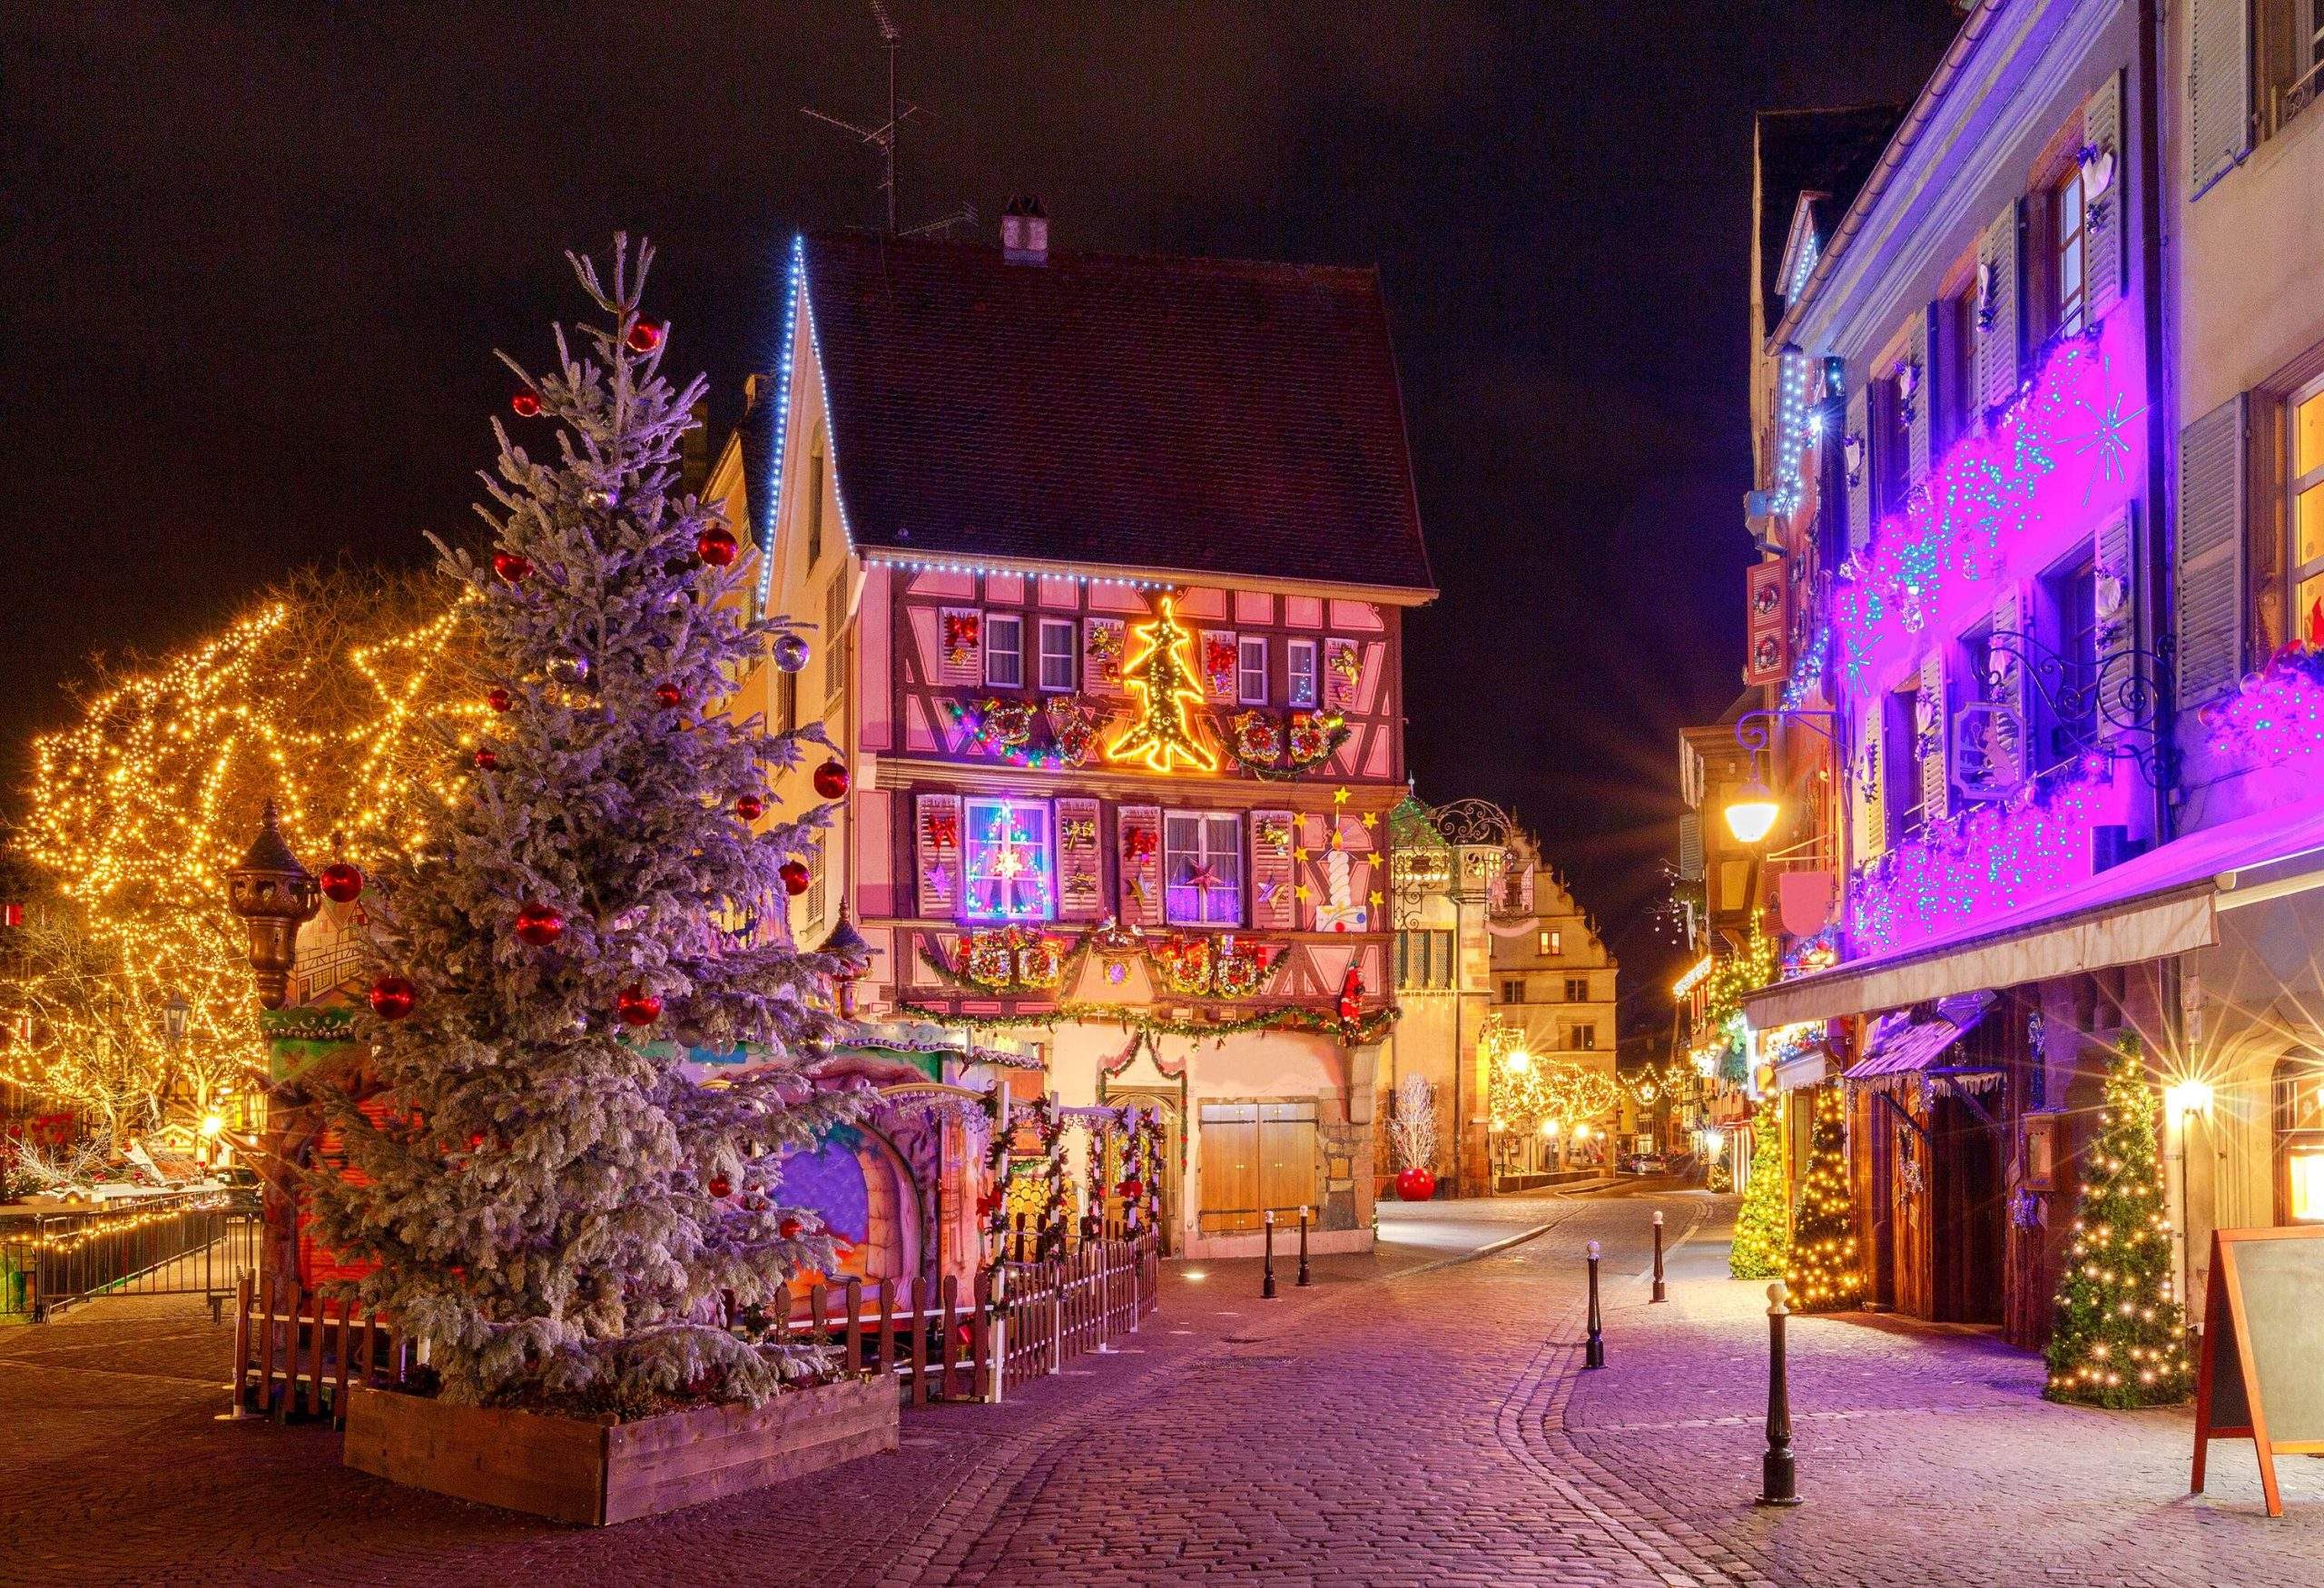 A street of traditional old half-timbered houses decorated with colourful Christmas lights and various Christmas ornaments.